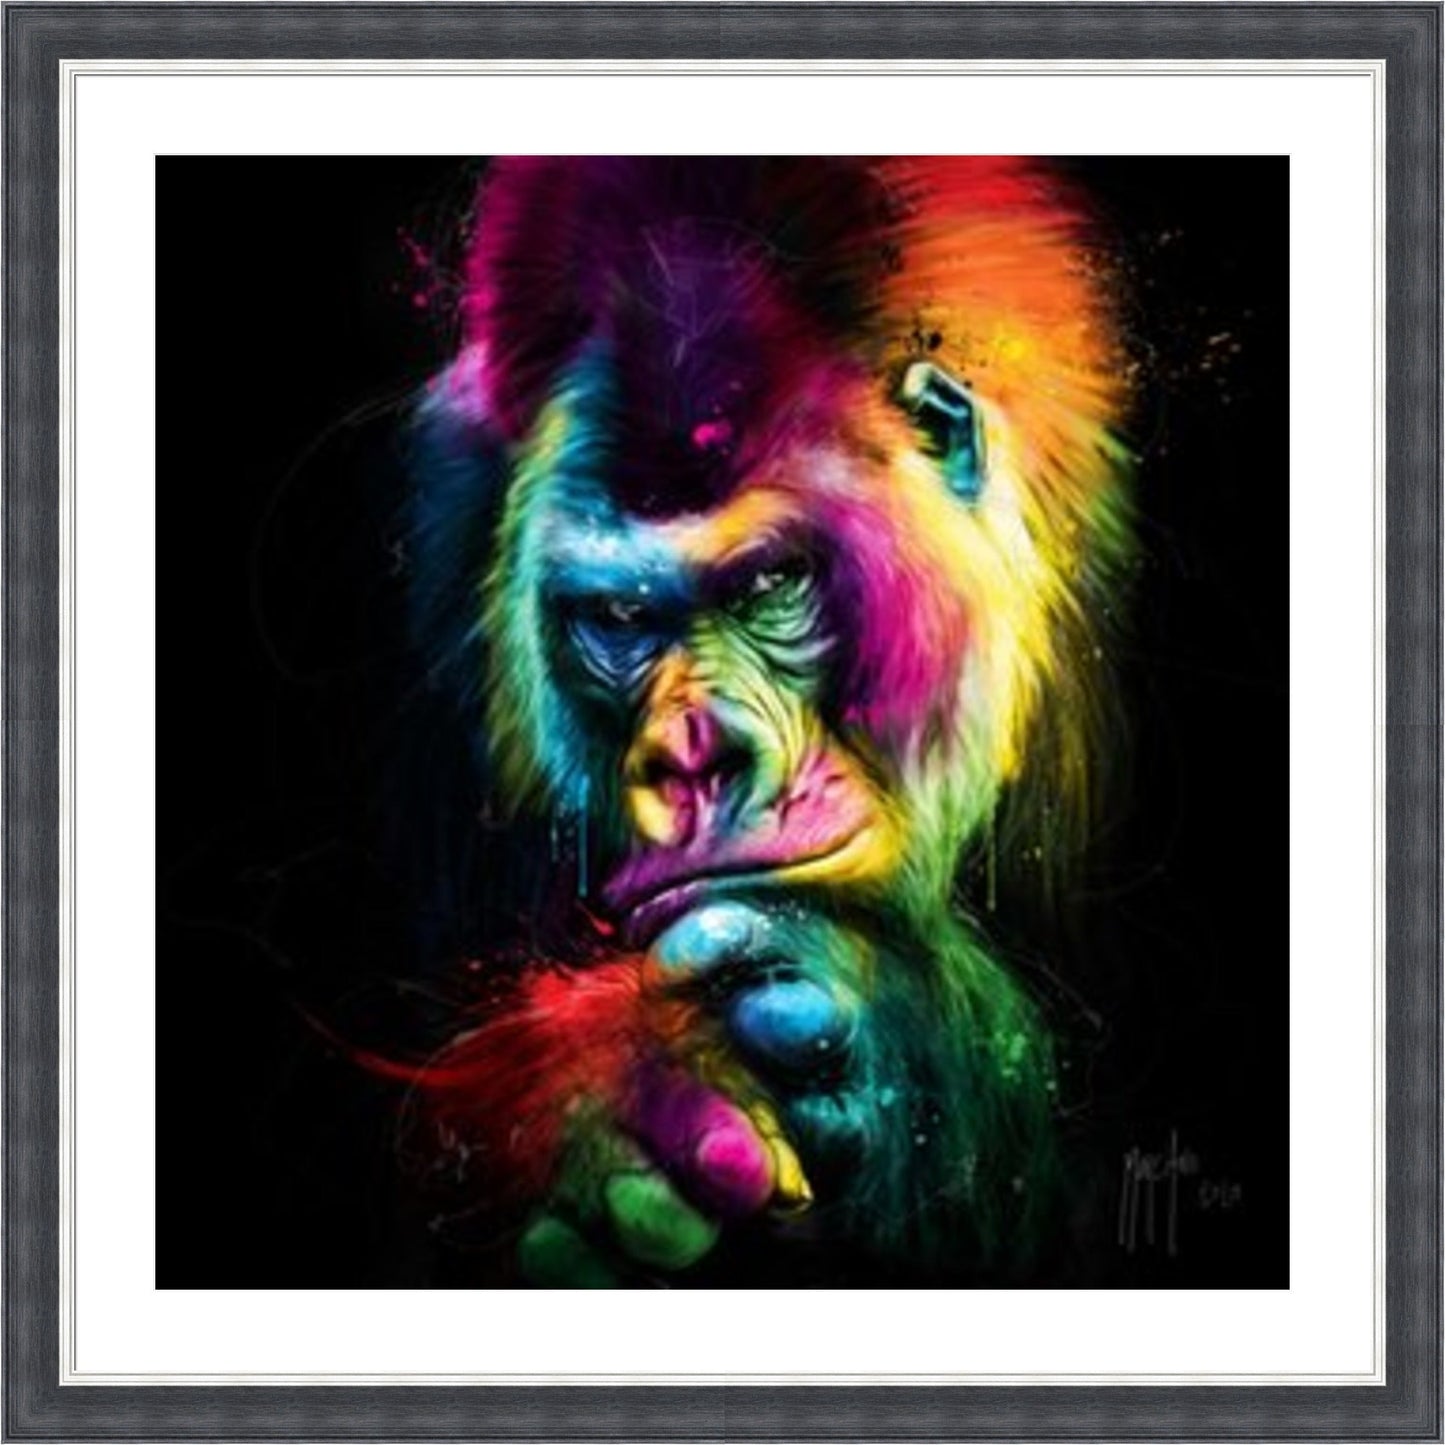 Le Vieux Sage - The Old Wise by Patrice Murciano